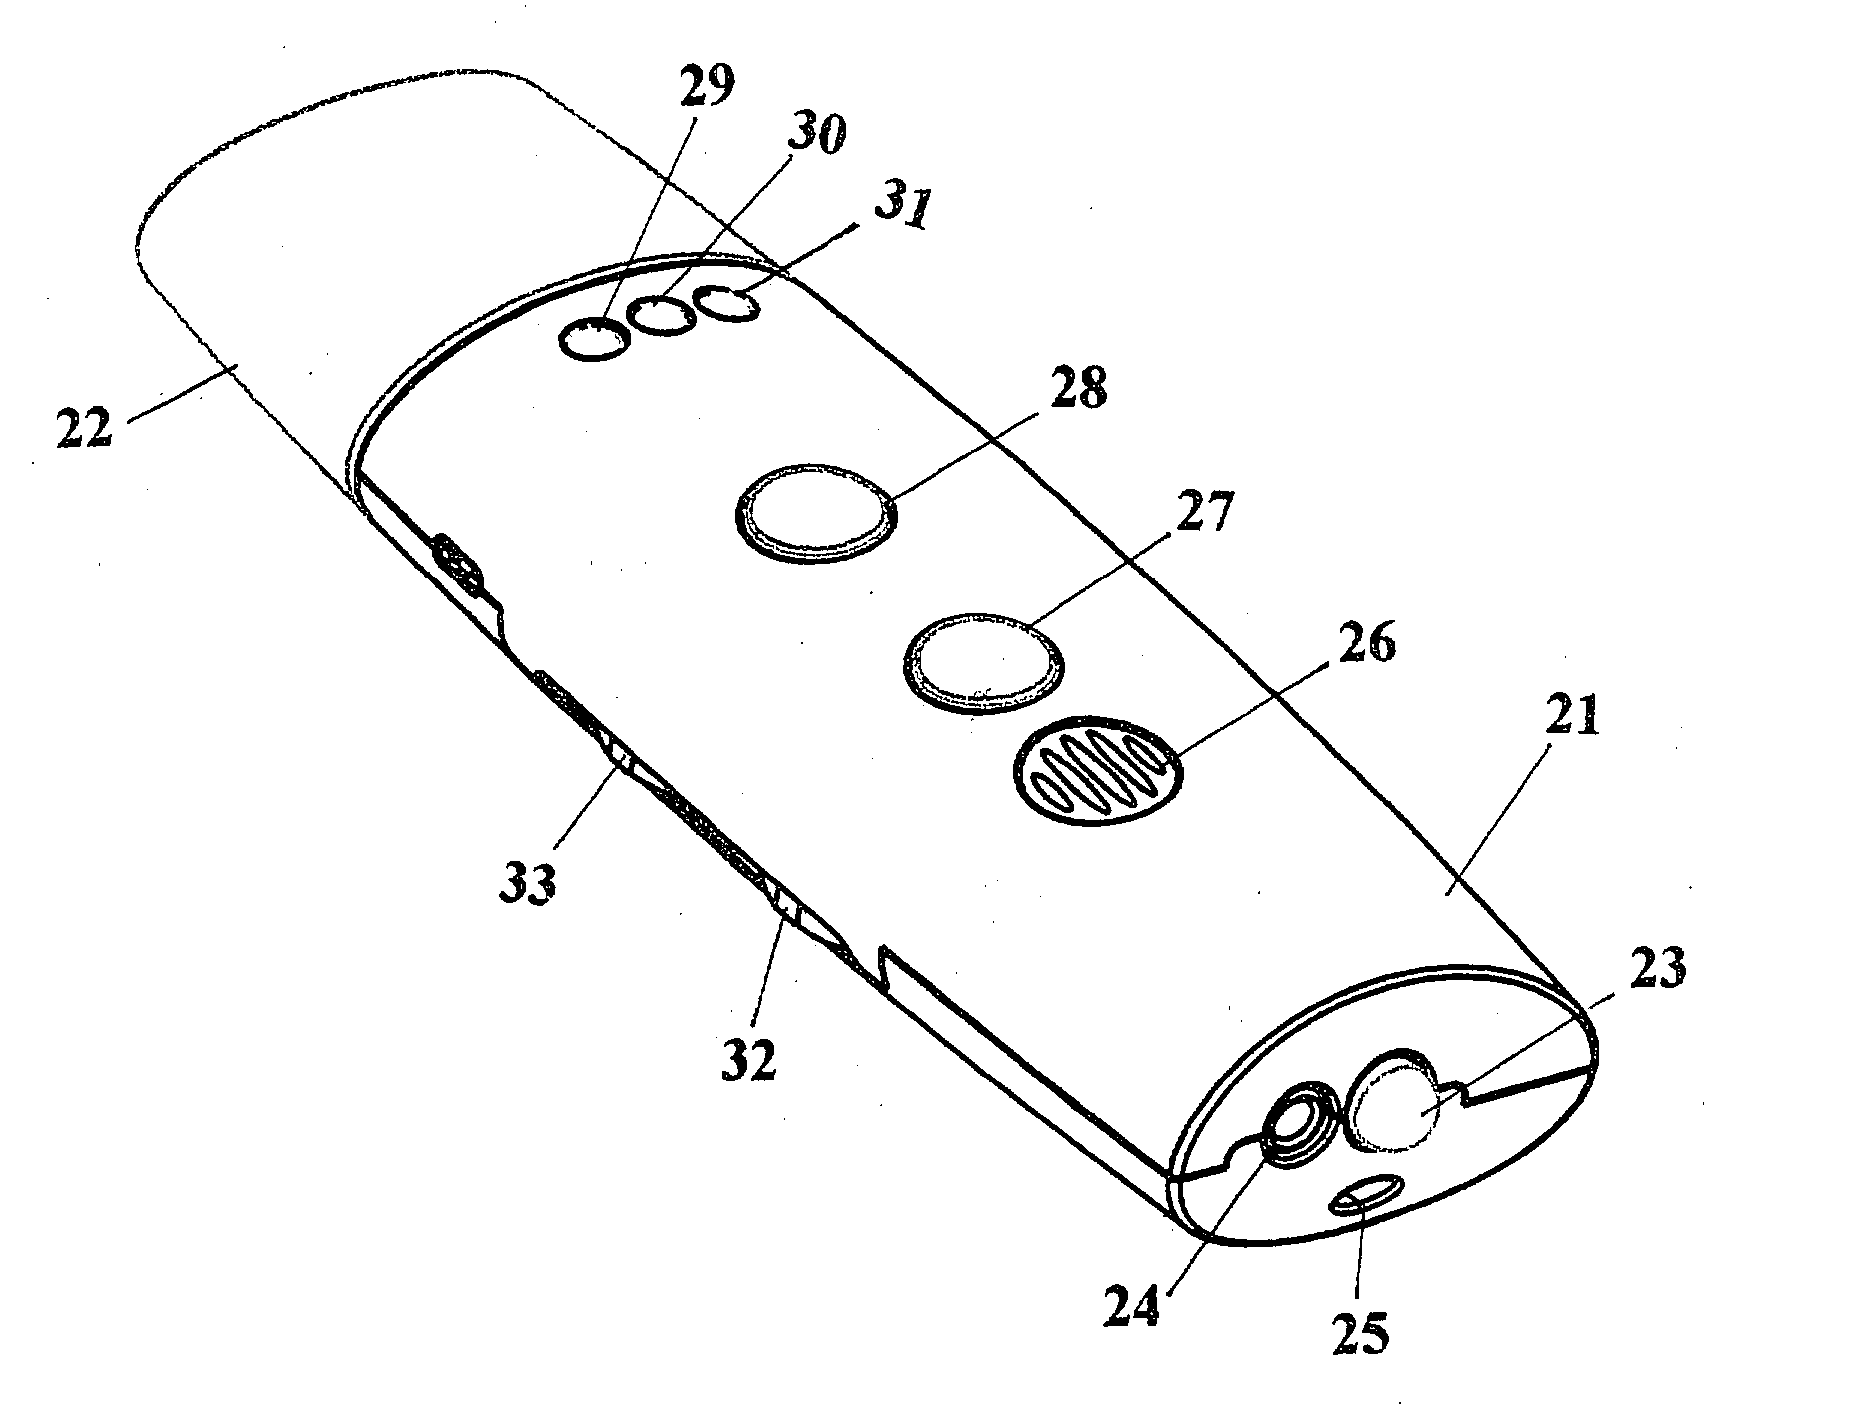 Structure of a multi-purpose thump-like hard disk device